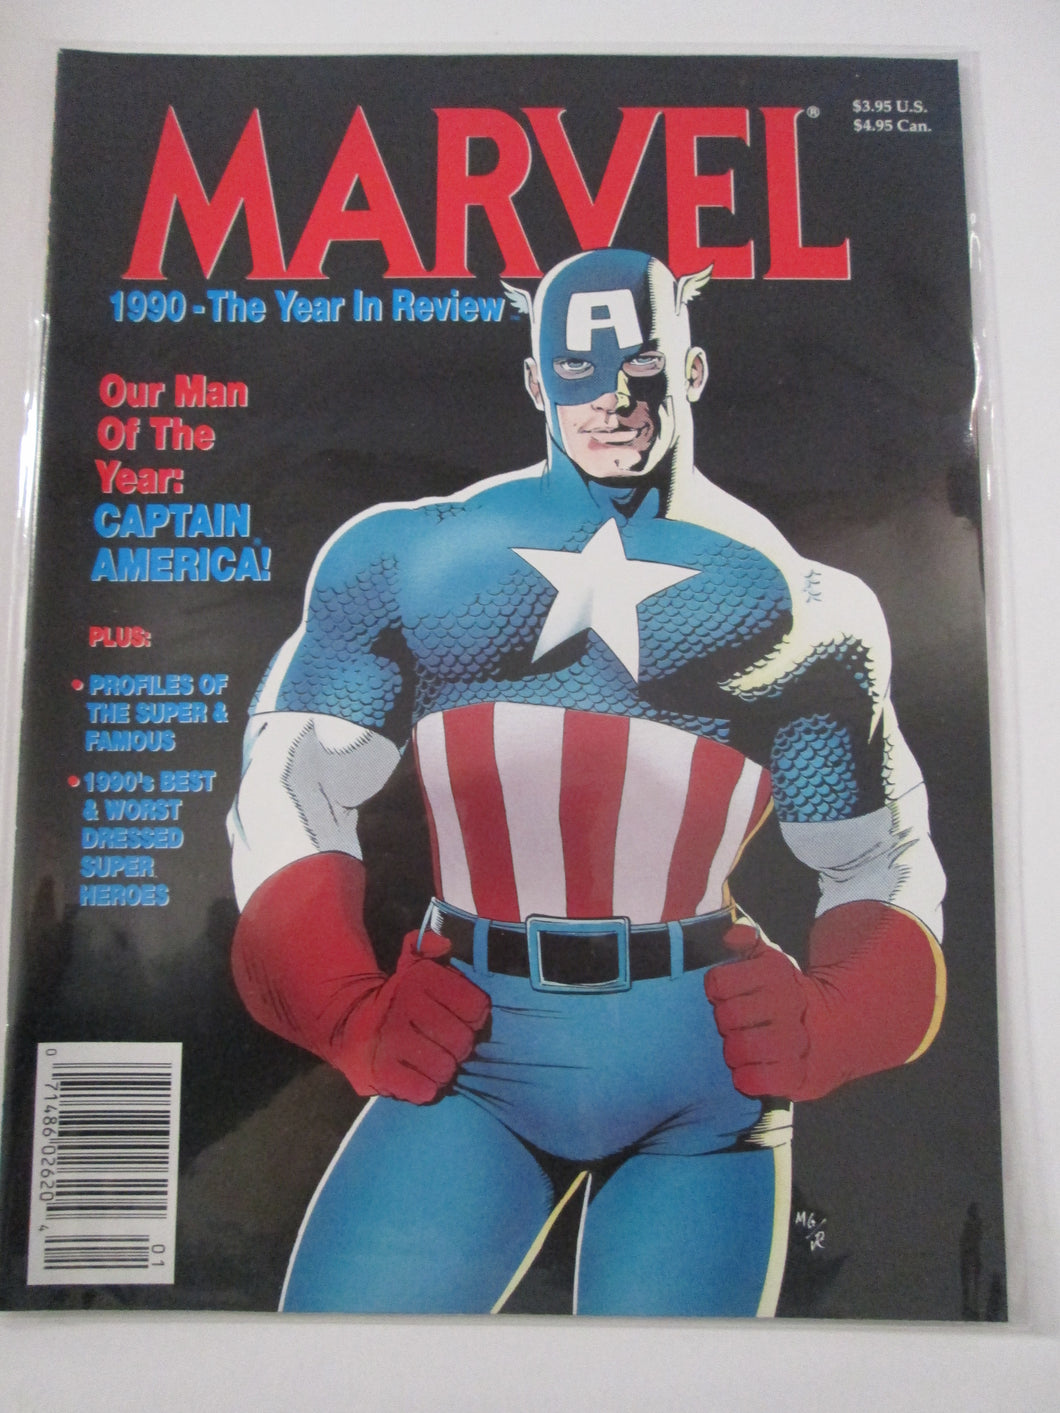 Marvel 1990 The Year in Review Magazine